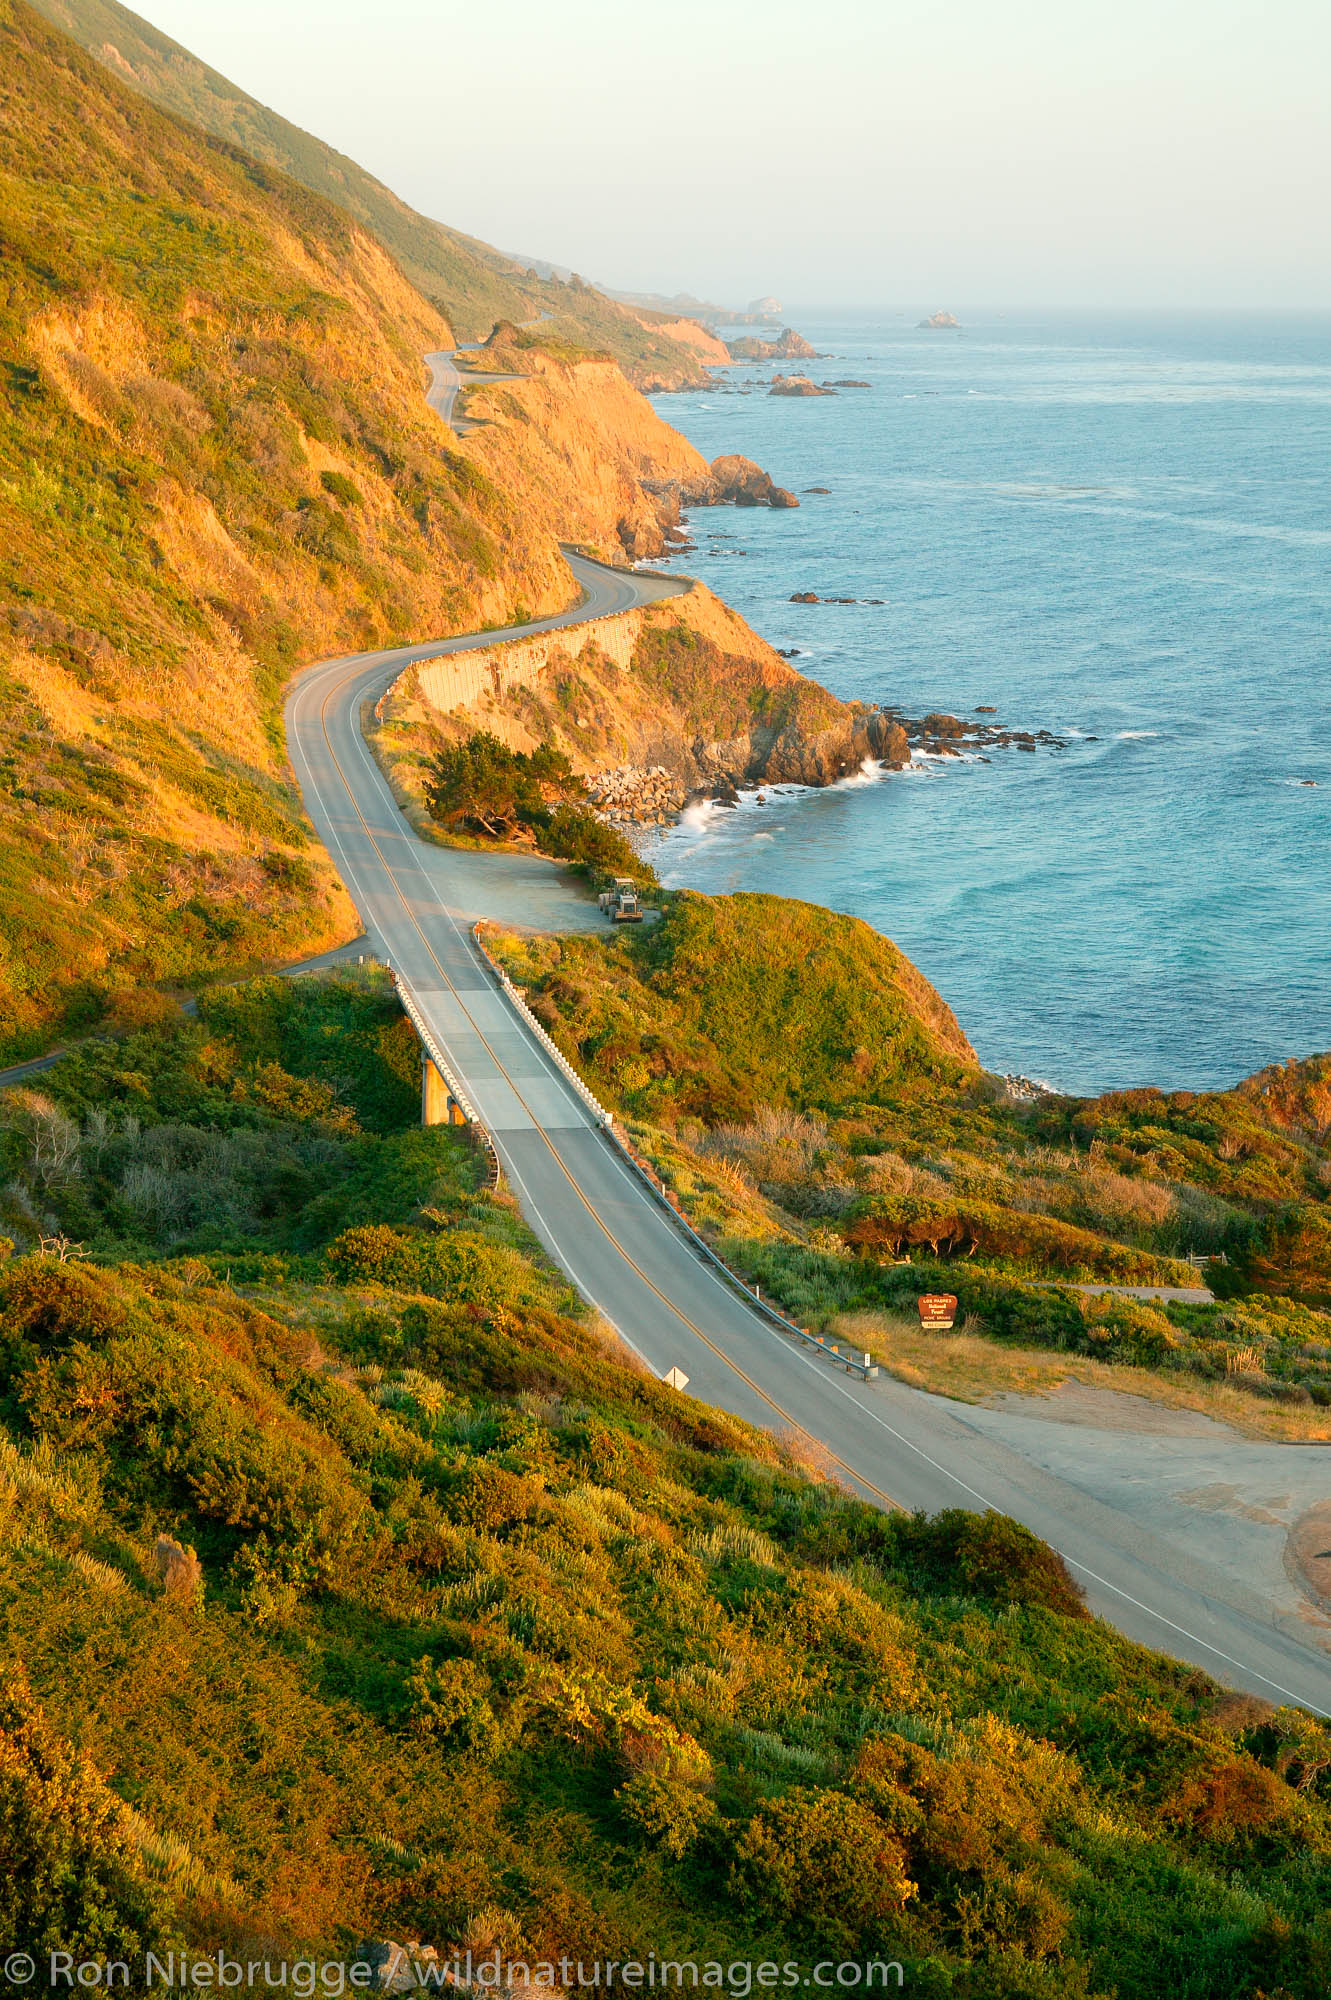 Pacific Coast Highway, also known as the Cabrillo Highway or Highway 1 along the Big Sur Coast, California.